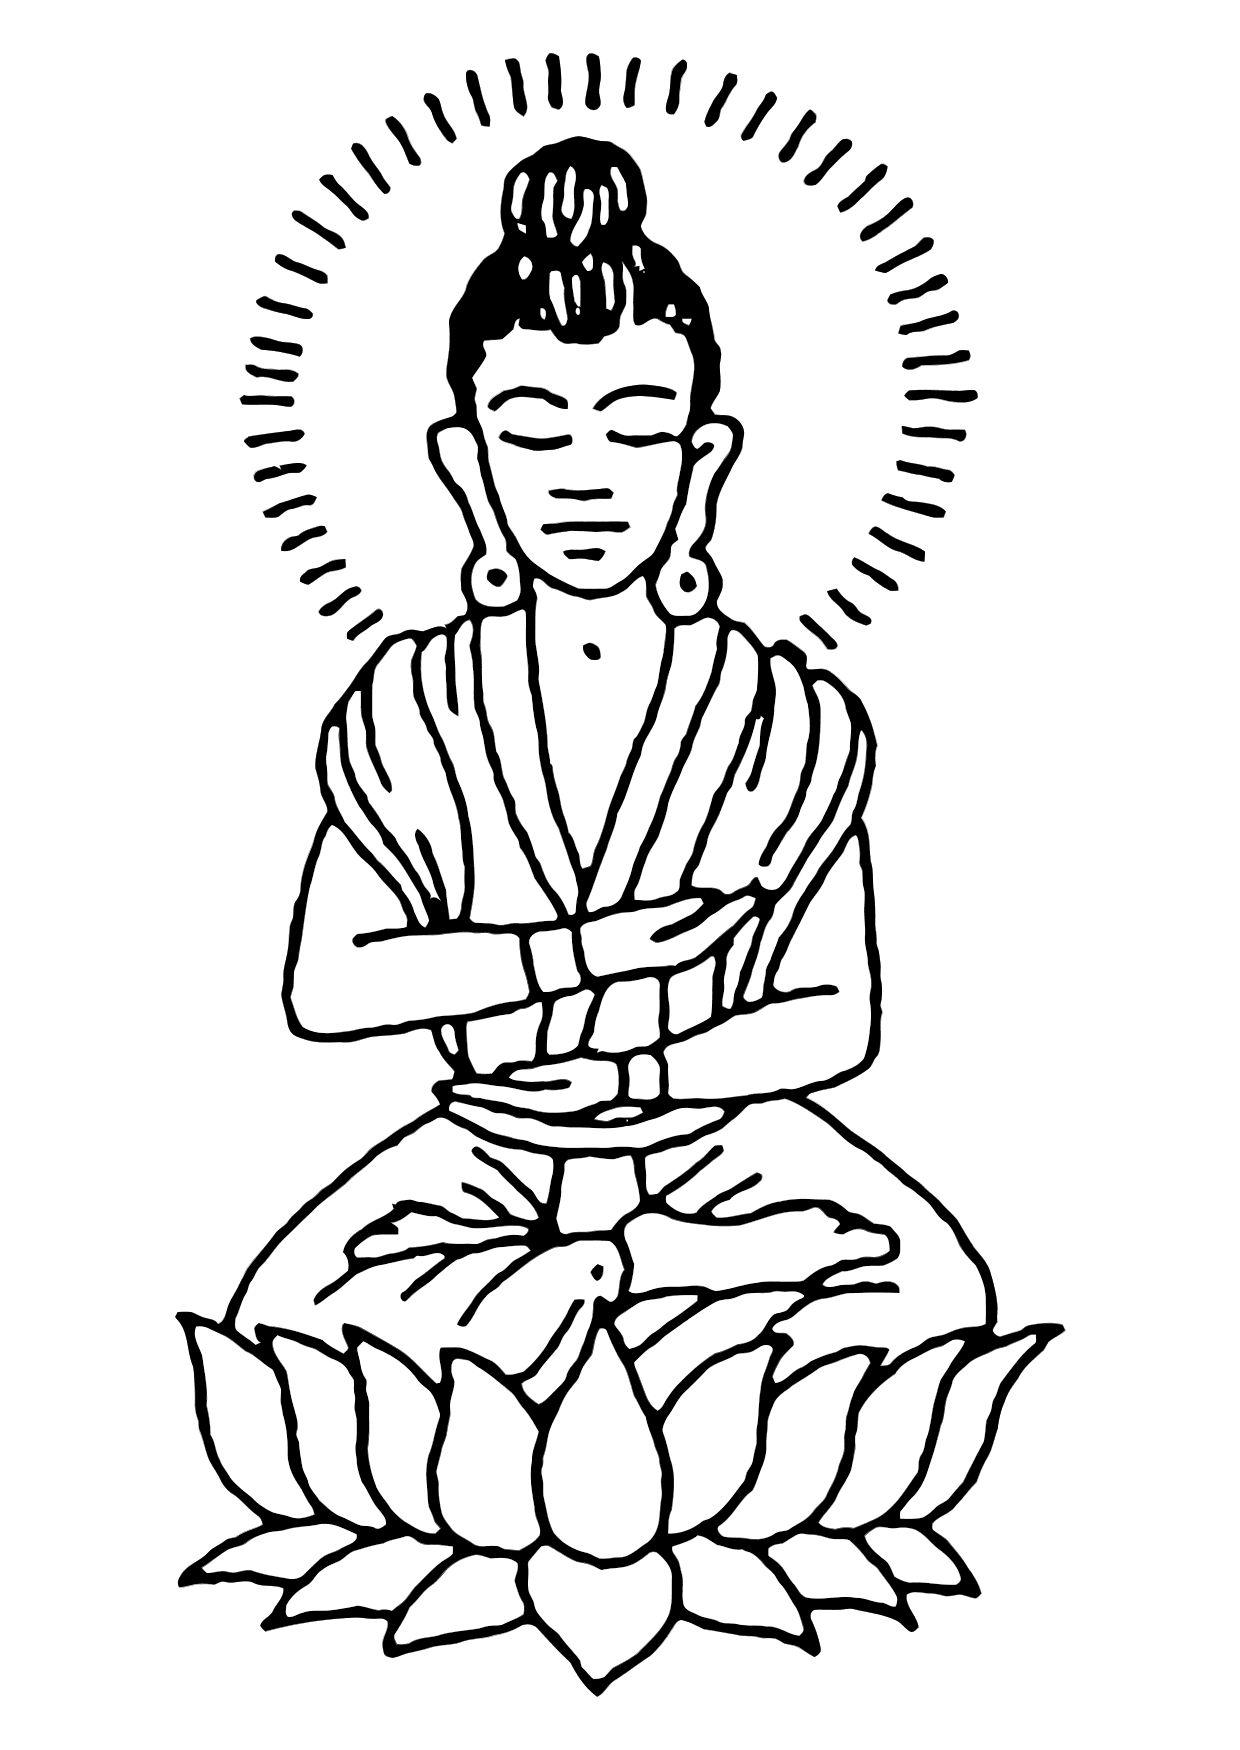 Coloring Page Buddha - free printable coloring pages - Img 11444